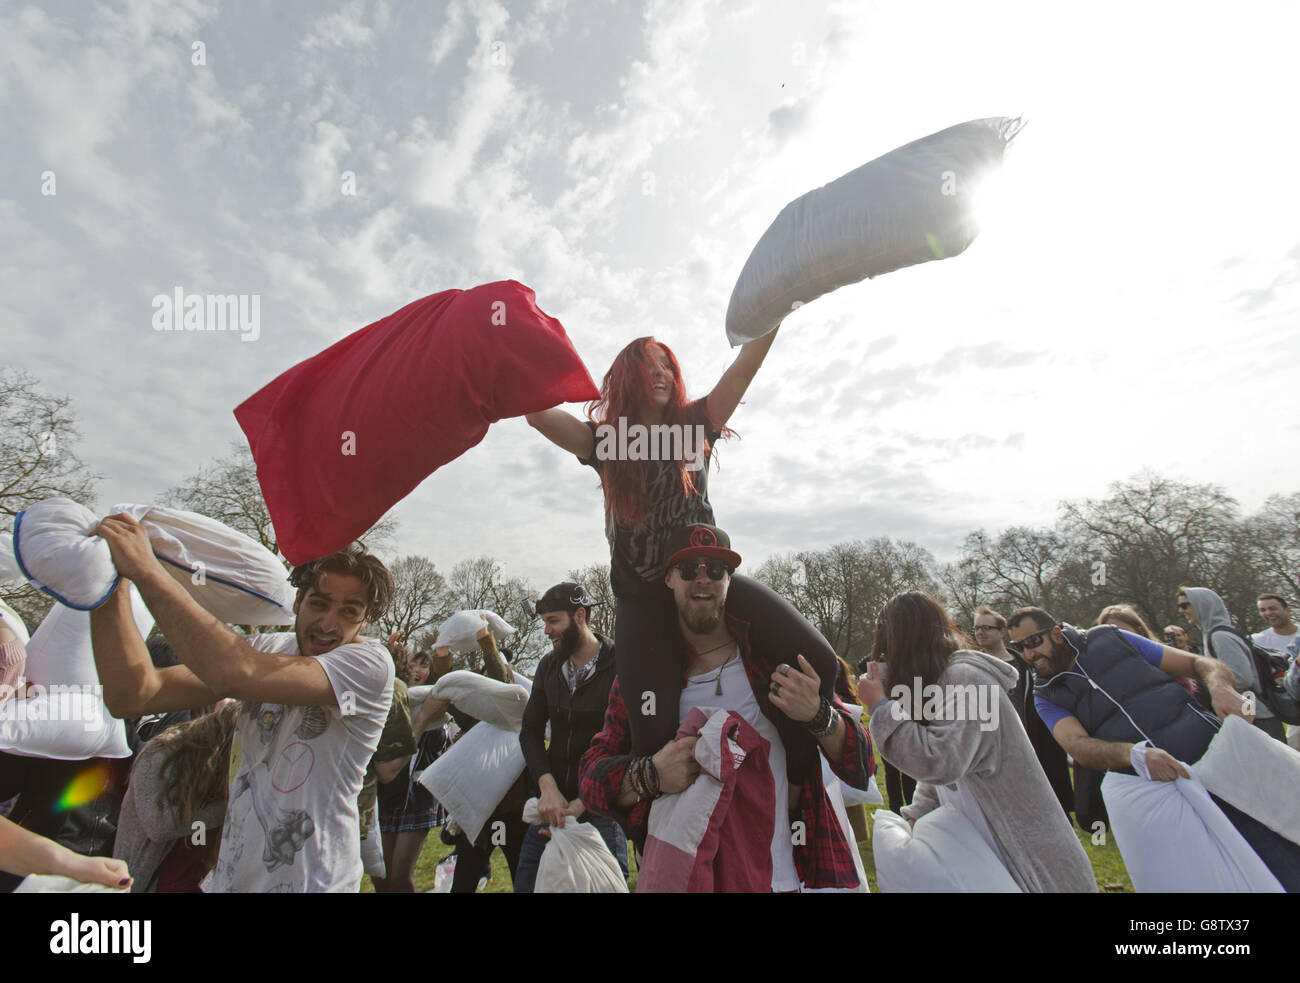 People take part in a mass pillow fight in Kennington Park in London, to mark International Pillow Fight Day. Stock Photo